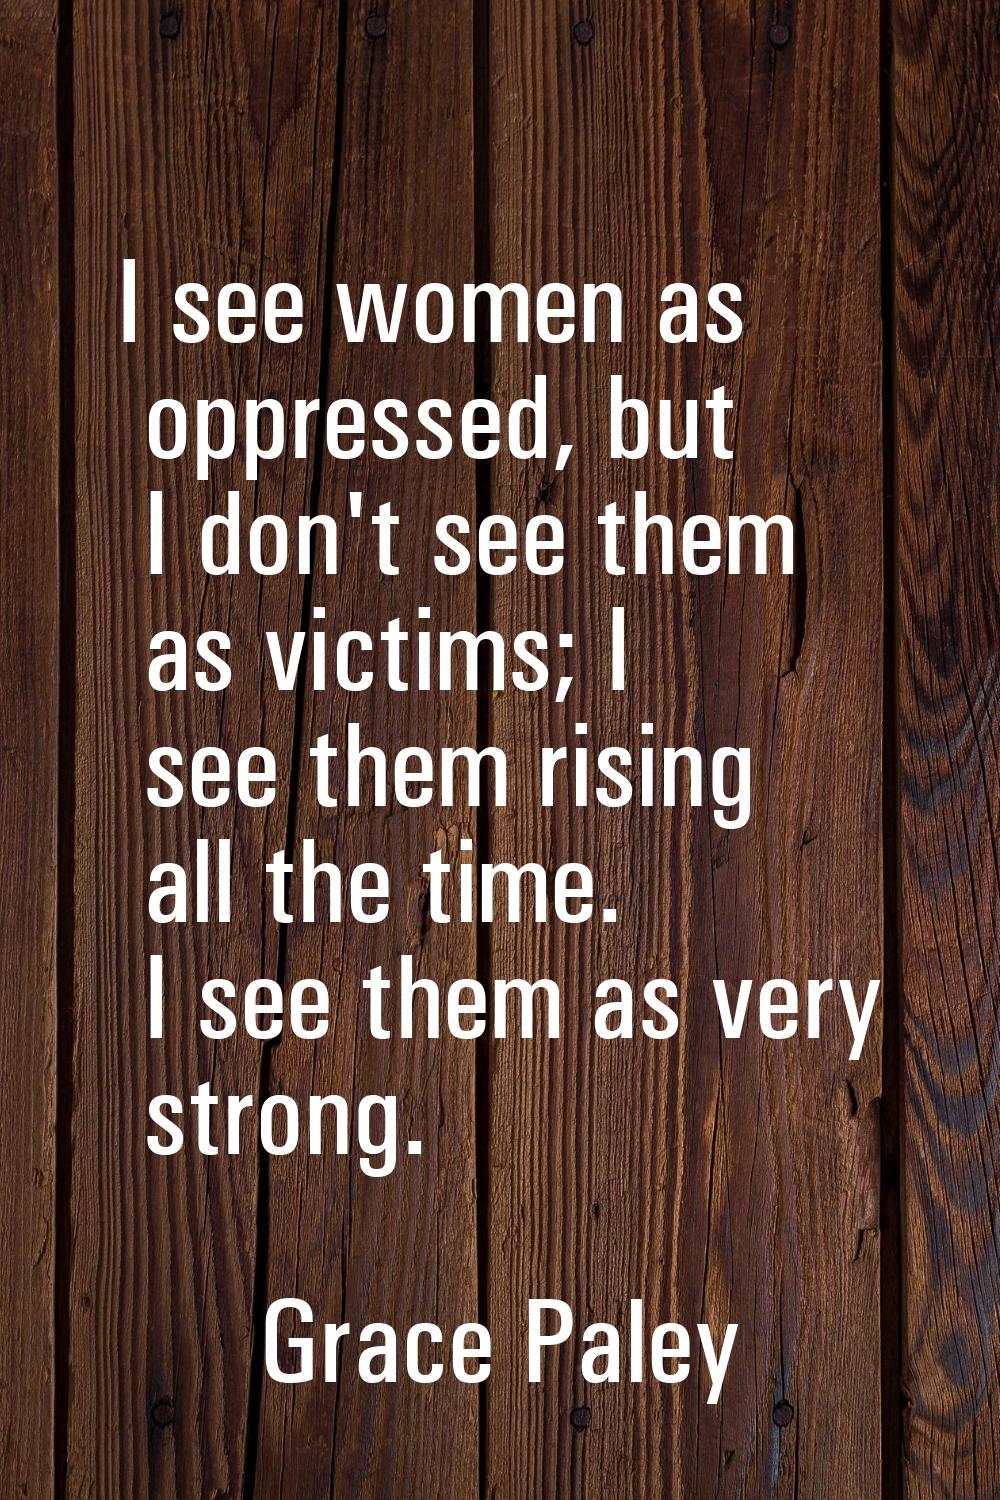 I see women as oppressed, but I don't see them as victims; I see them rising all the time. I see th